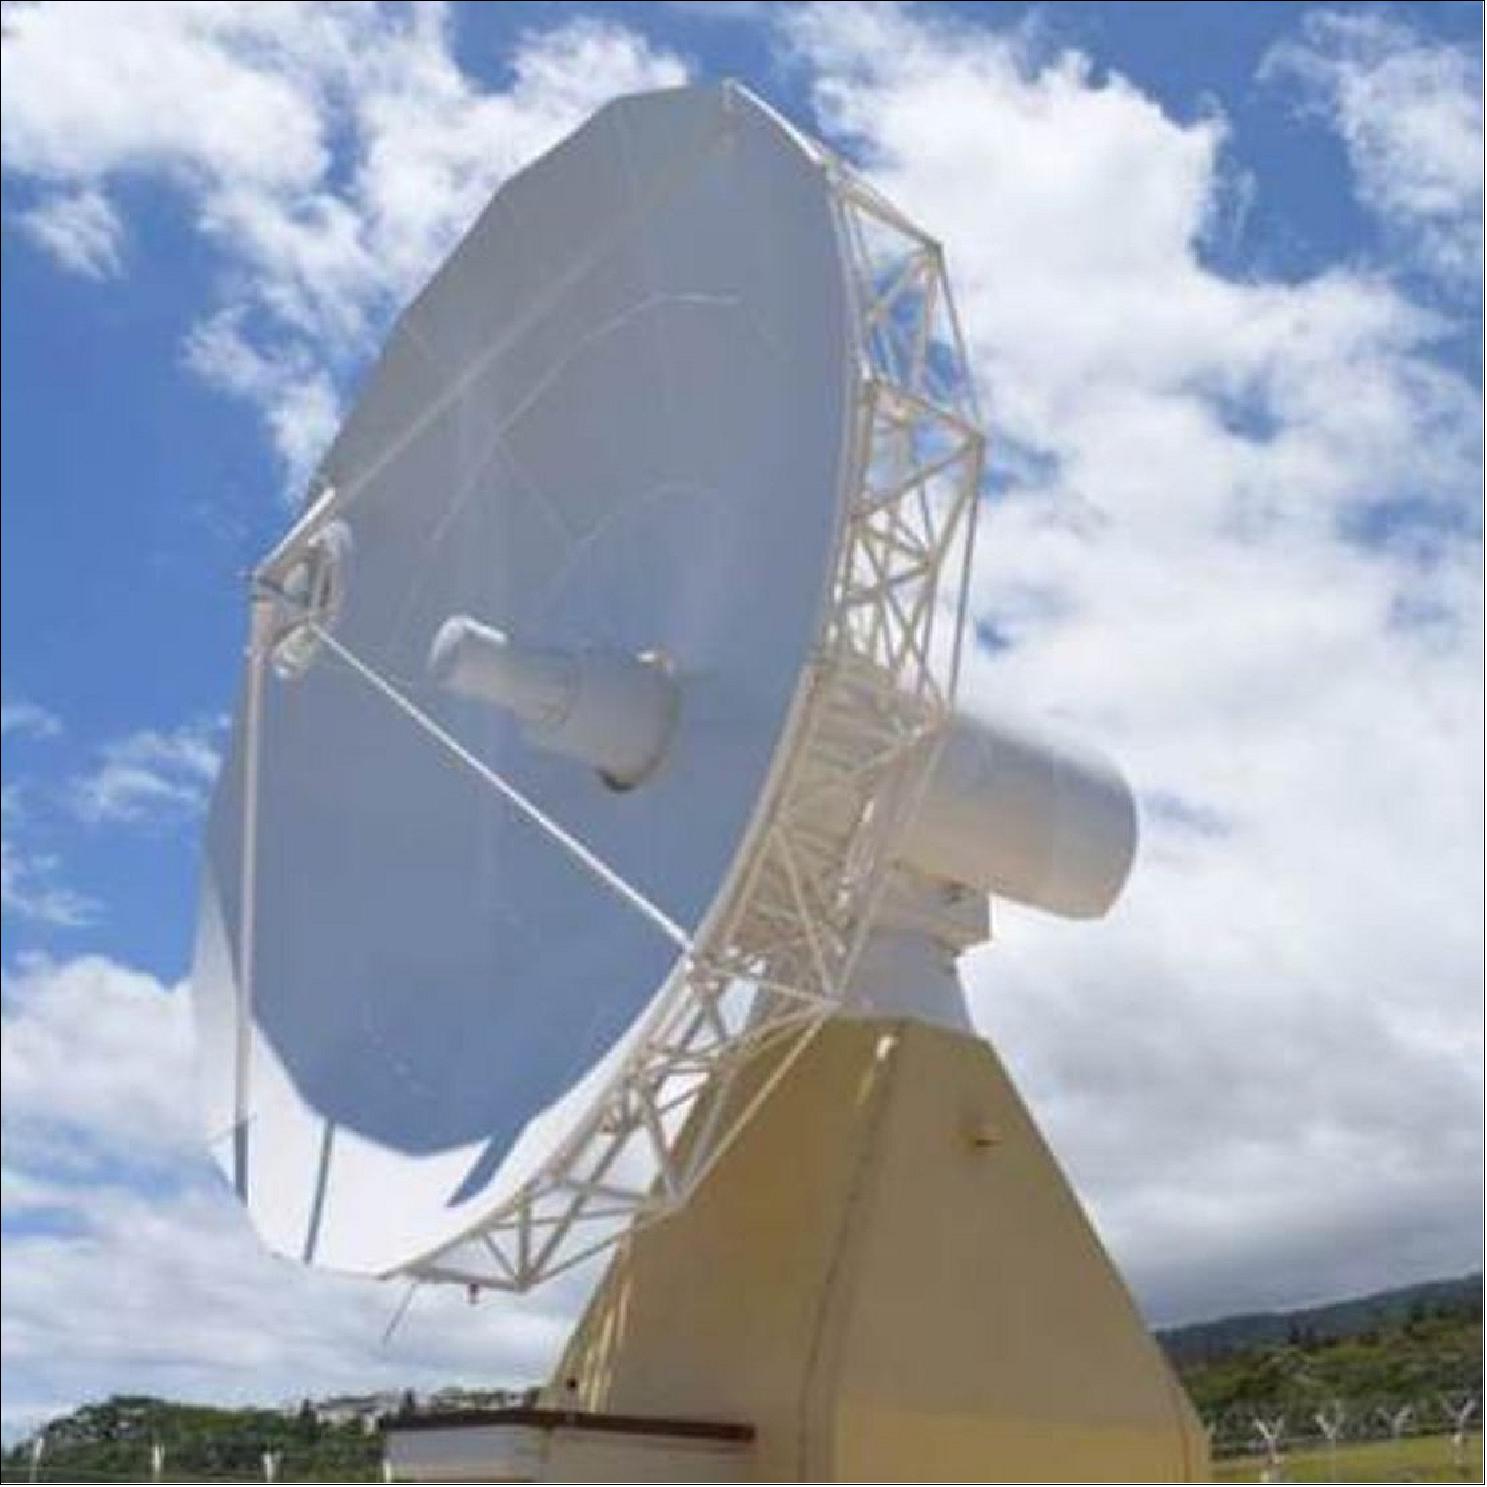 Figure 112: A new telemetry, tracking and command station to serve Galileo, based in Papeete on Tahiti, in the South Pacific (image credit: ESA)